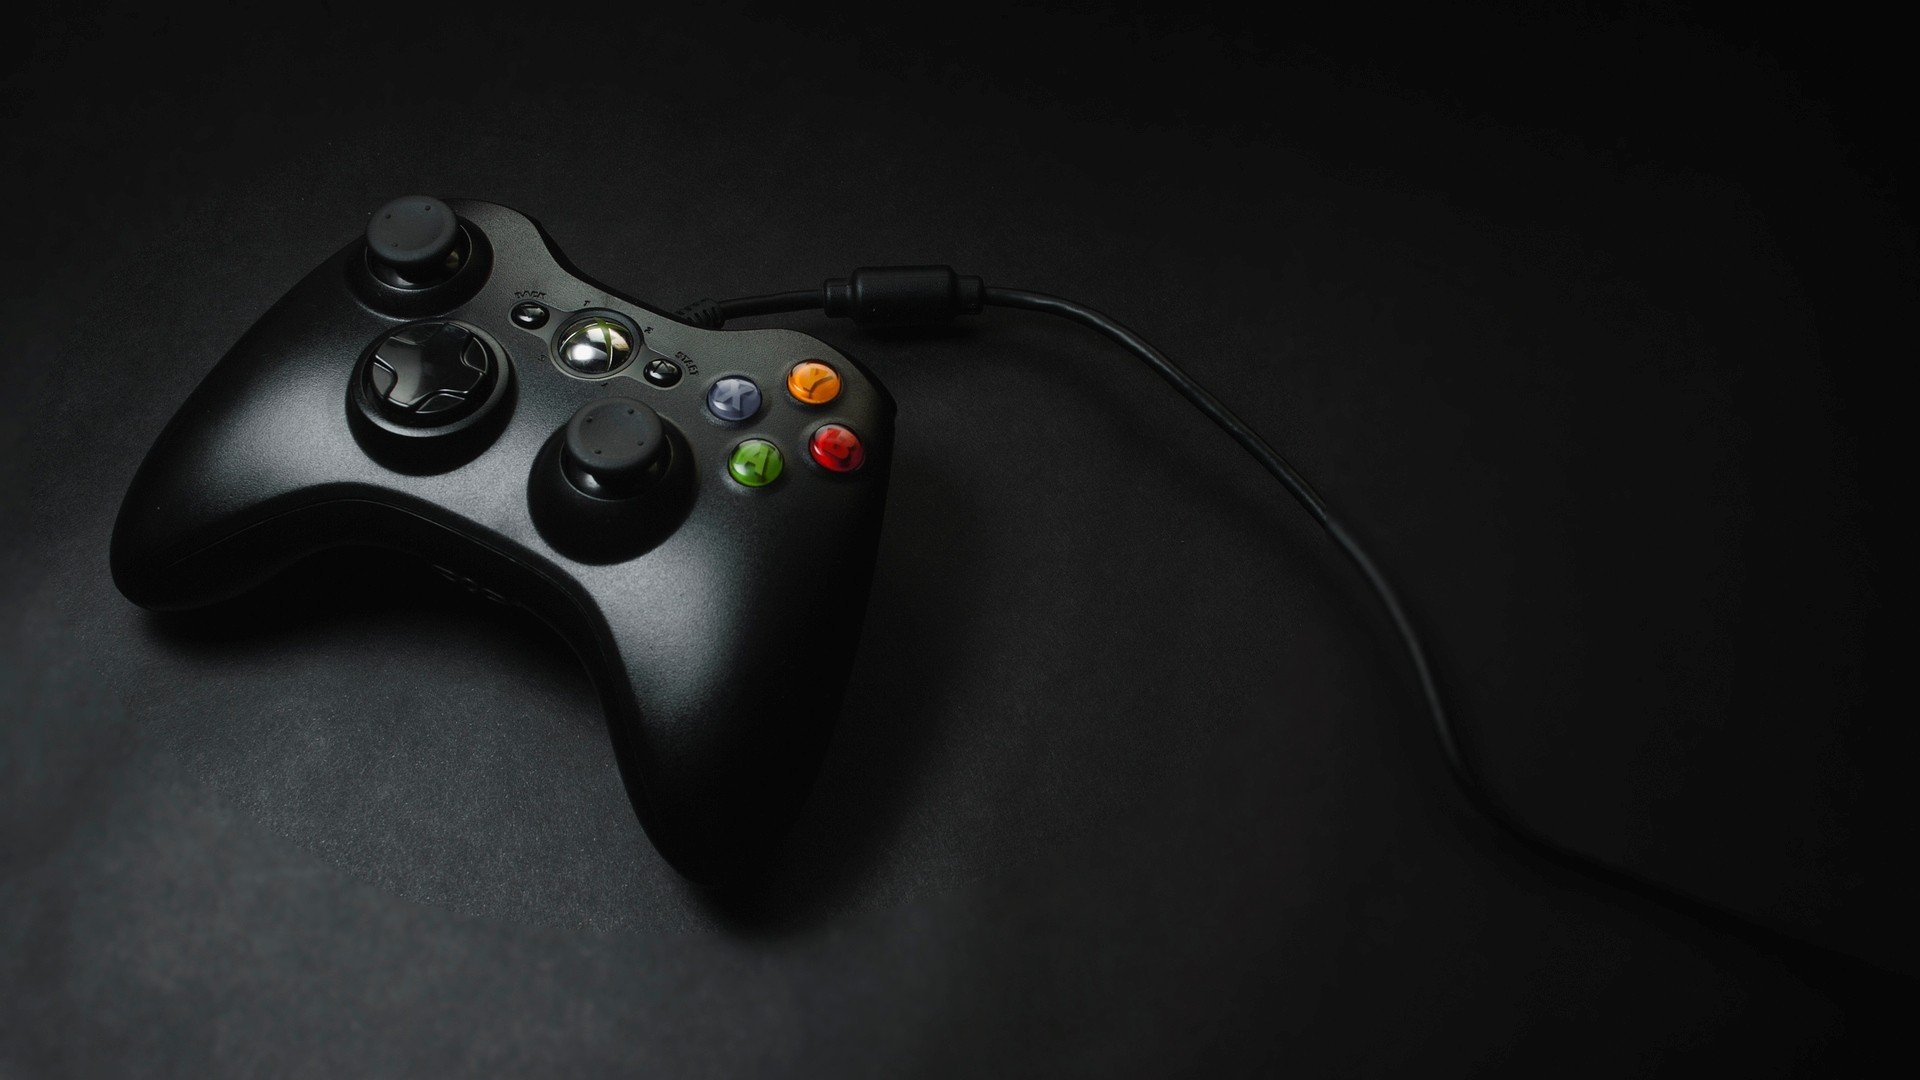 Xbox: The primary game controller for Microsoft's home video game console. 1920x1080 Full HD Wallpaper.